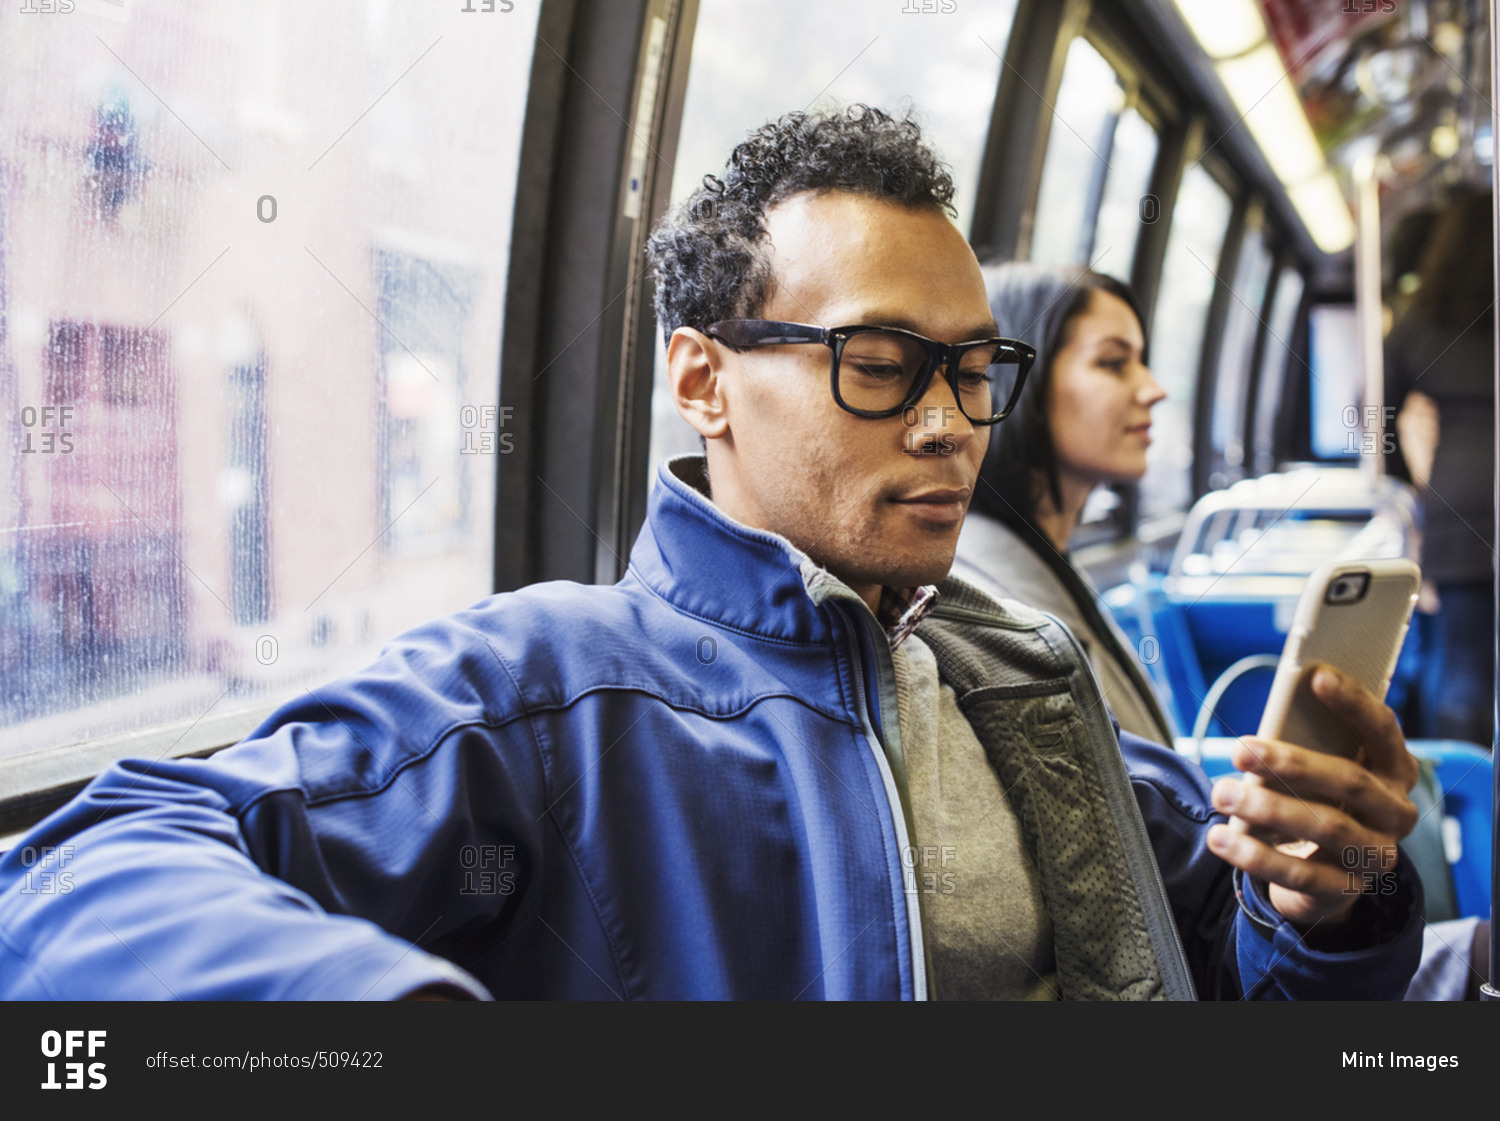 A young man and a young woman sitting on public transport looking at their cellphones